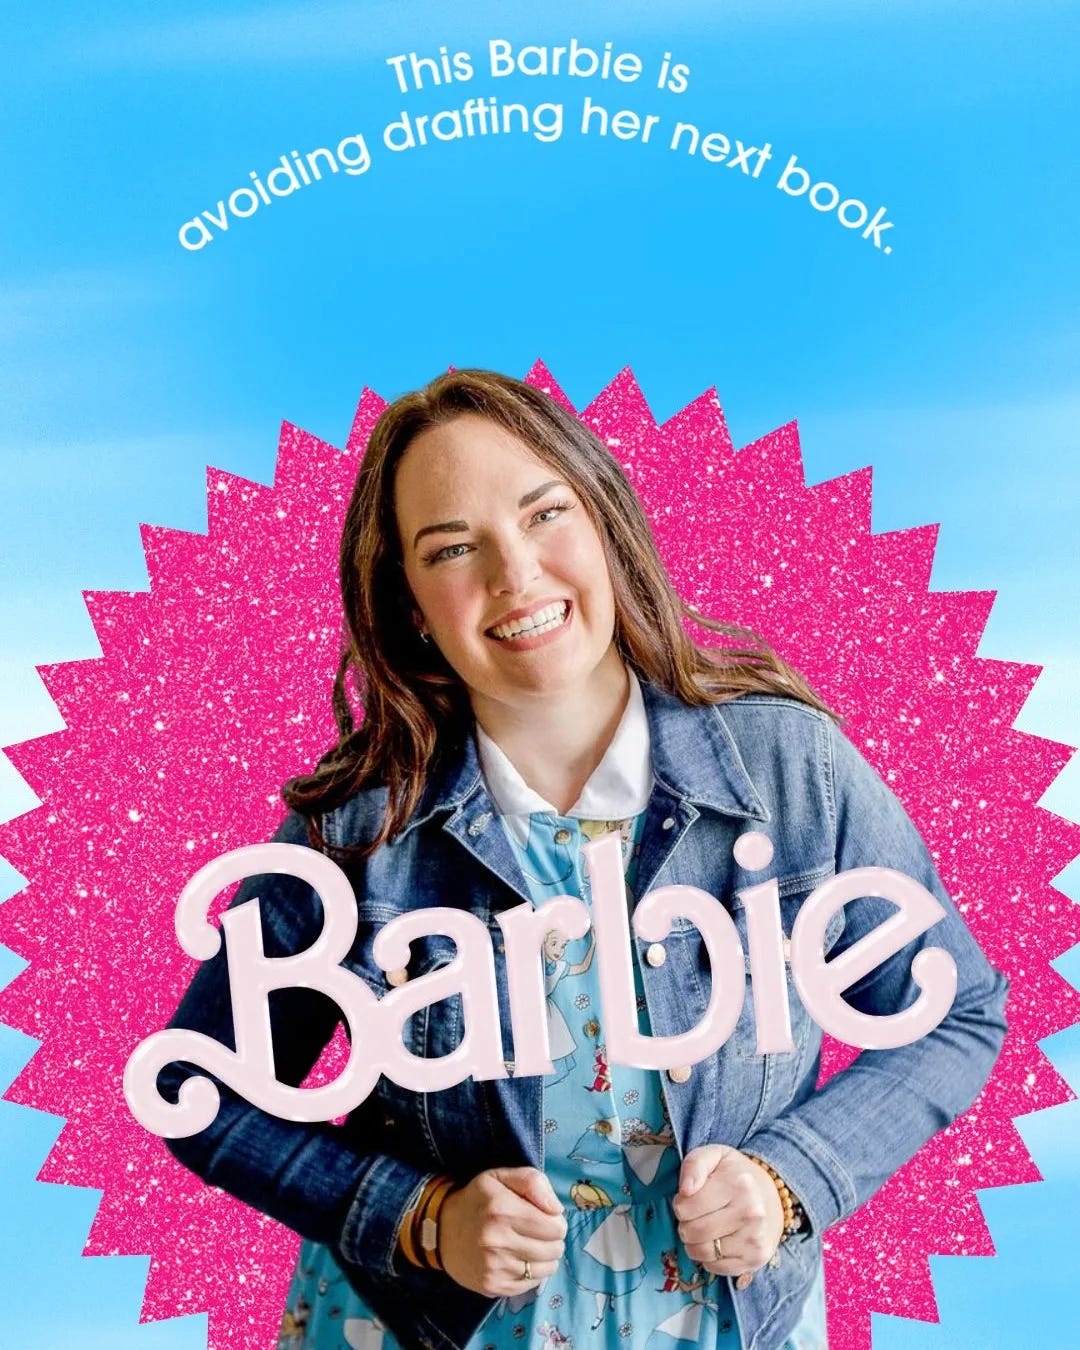 A white woman (me) is shown on a Barbie graphic with the words "This Barbie is avoiding drafting her next book.